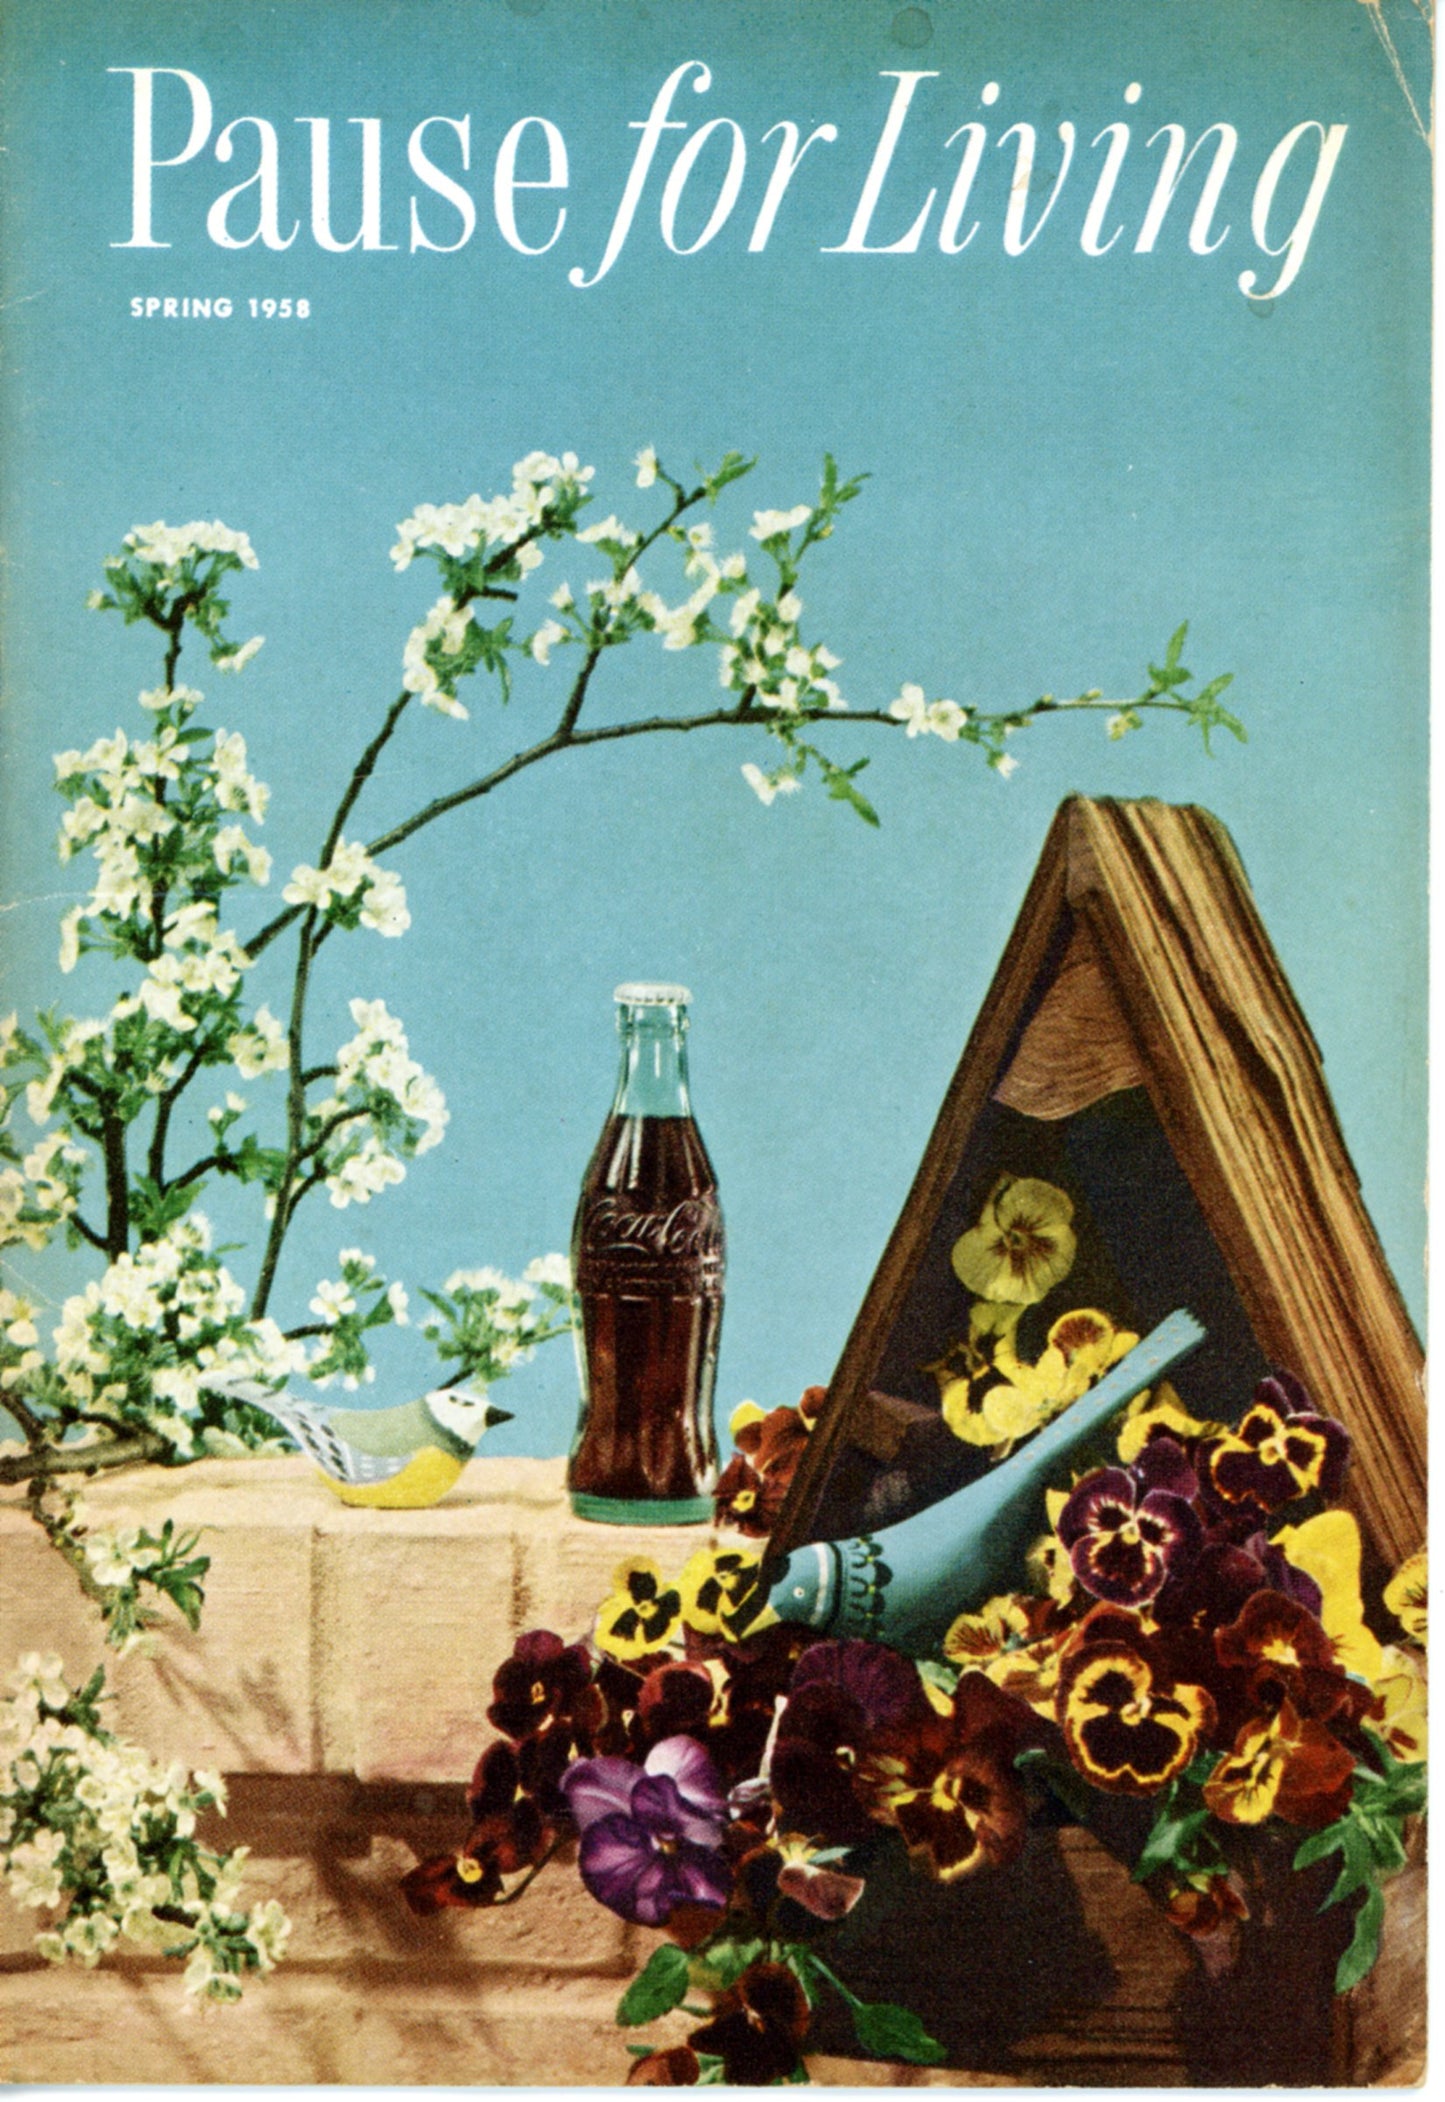 PAUSE FOR LIVING Seasonal Entertaining Booklets by Coca Cola Full Set from 1958